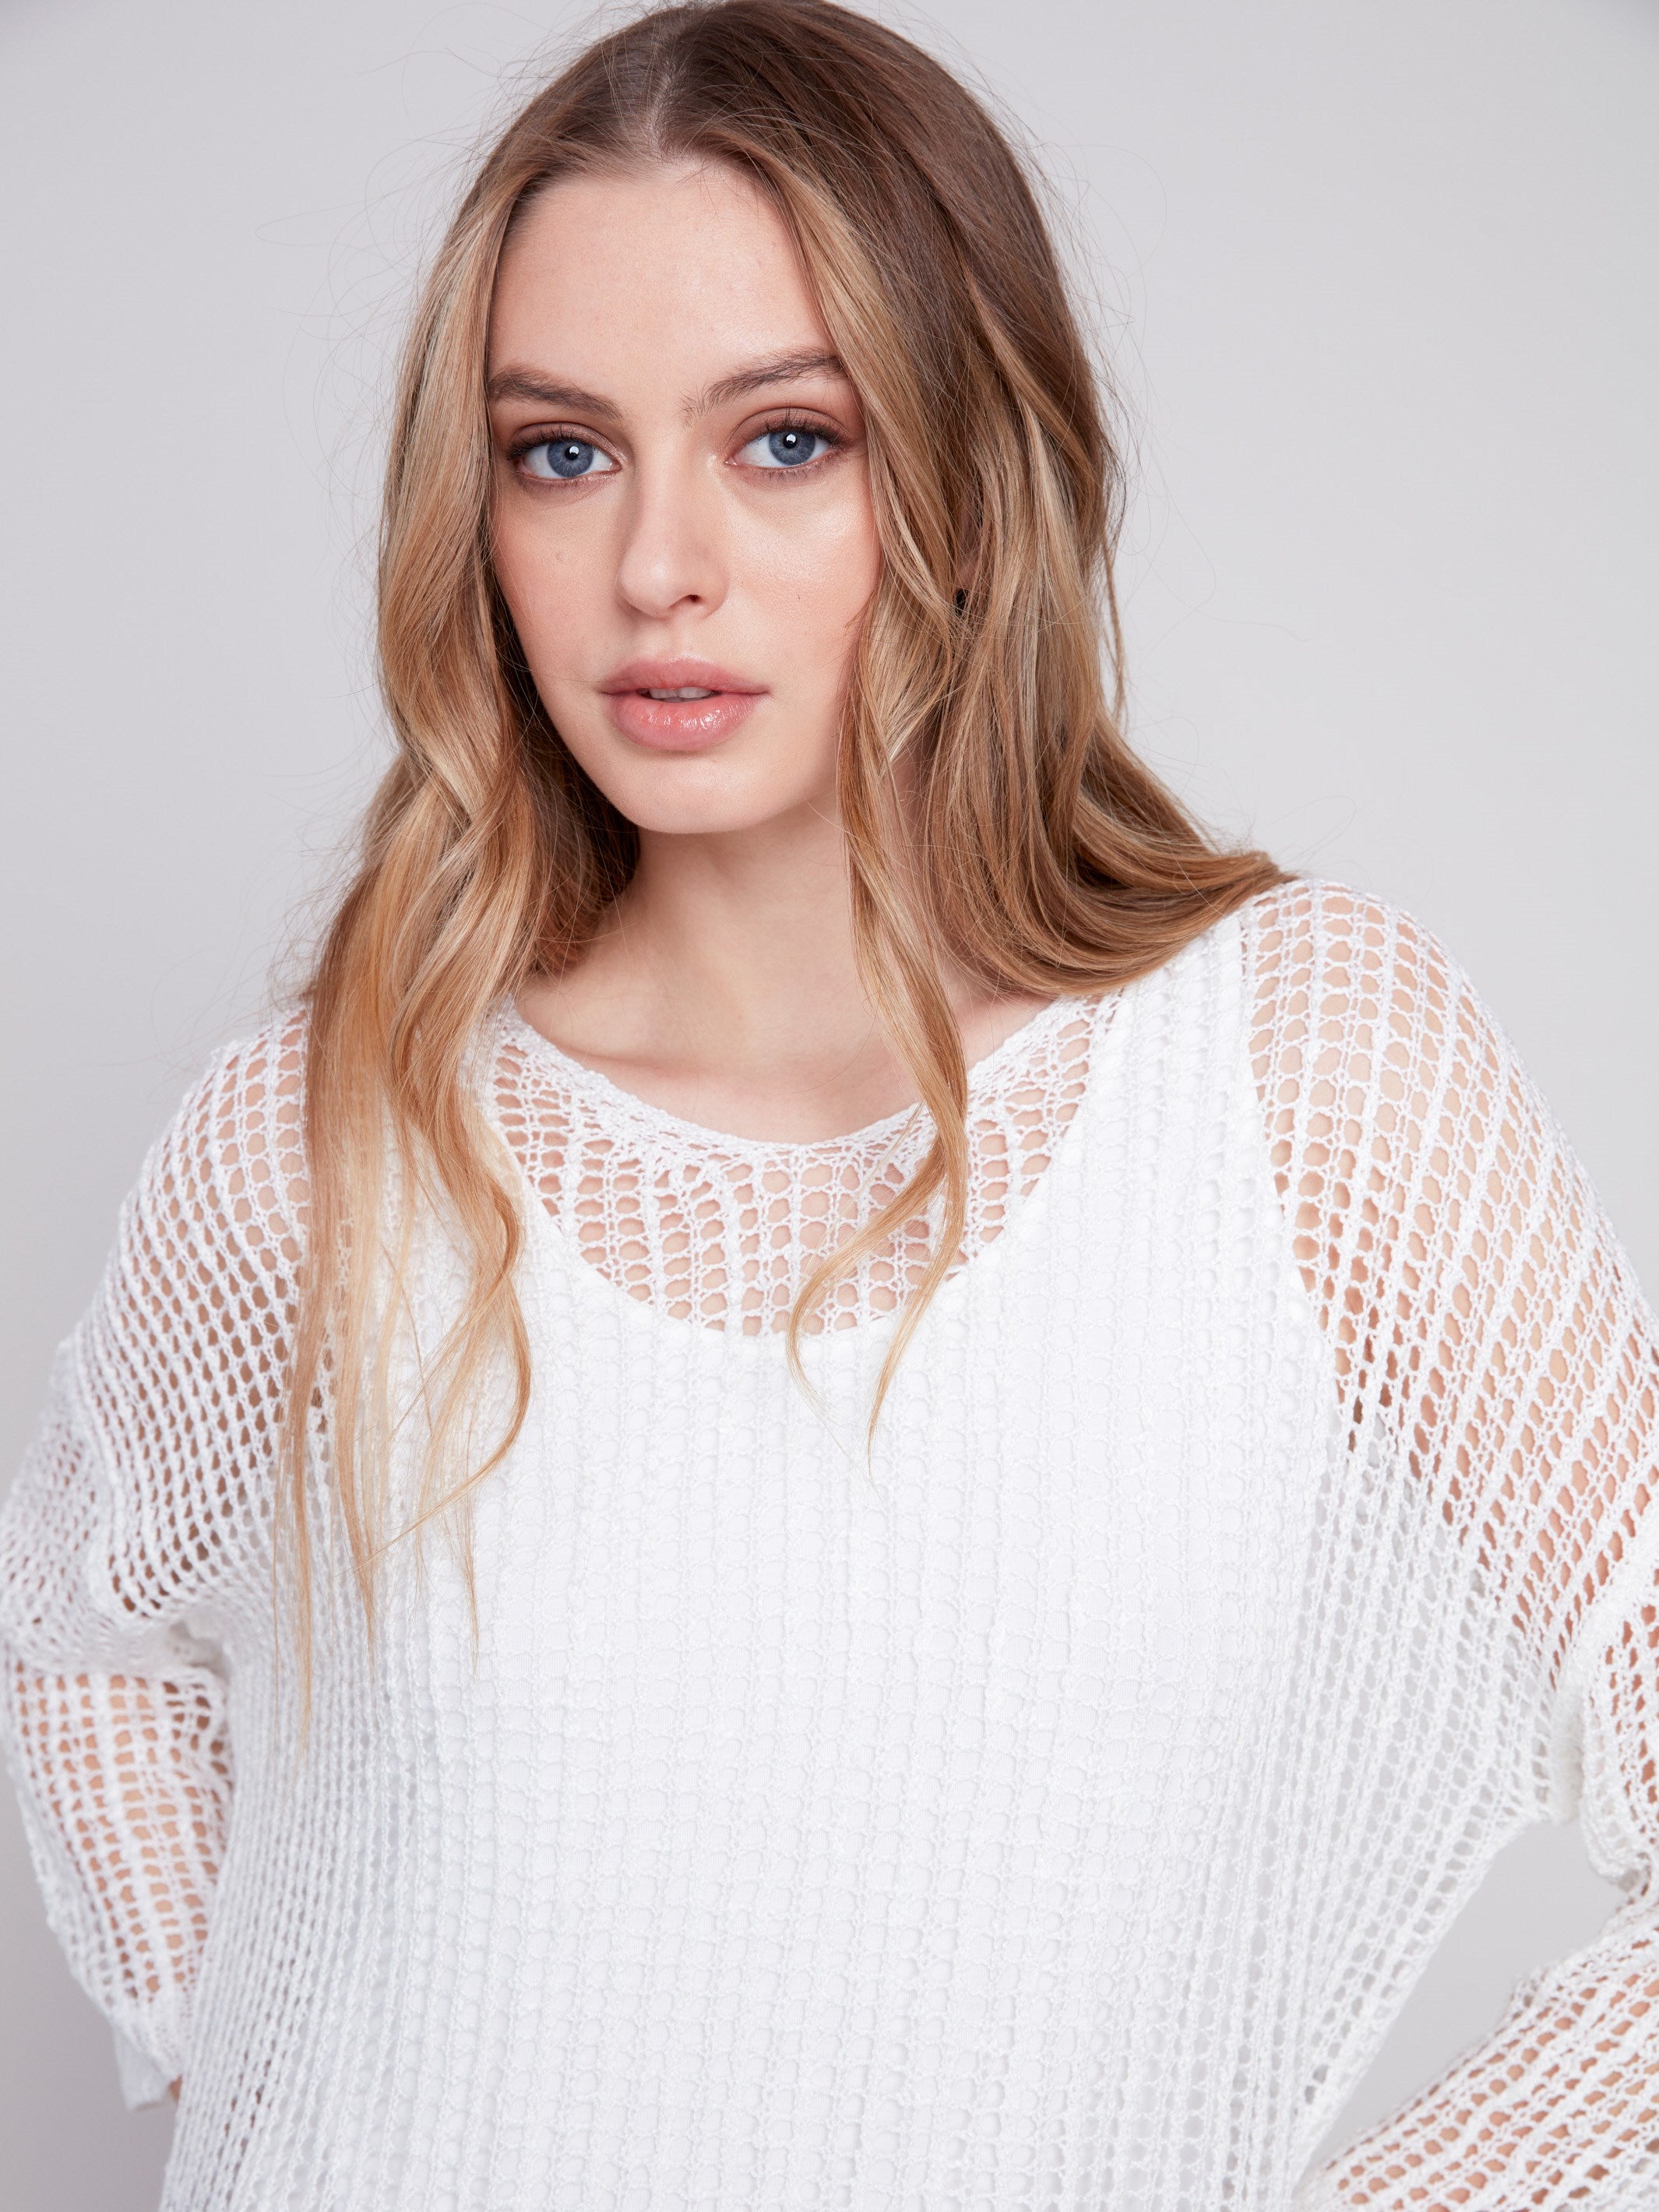 Fishnet Crochet Sweater - White - Charlie B Collection Canada - Image 4